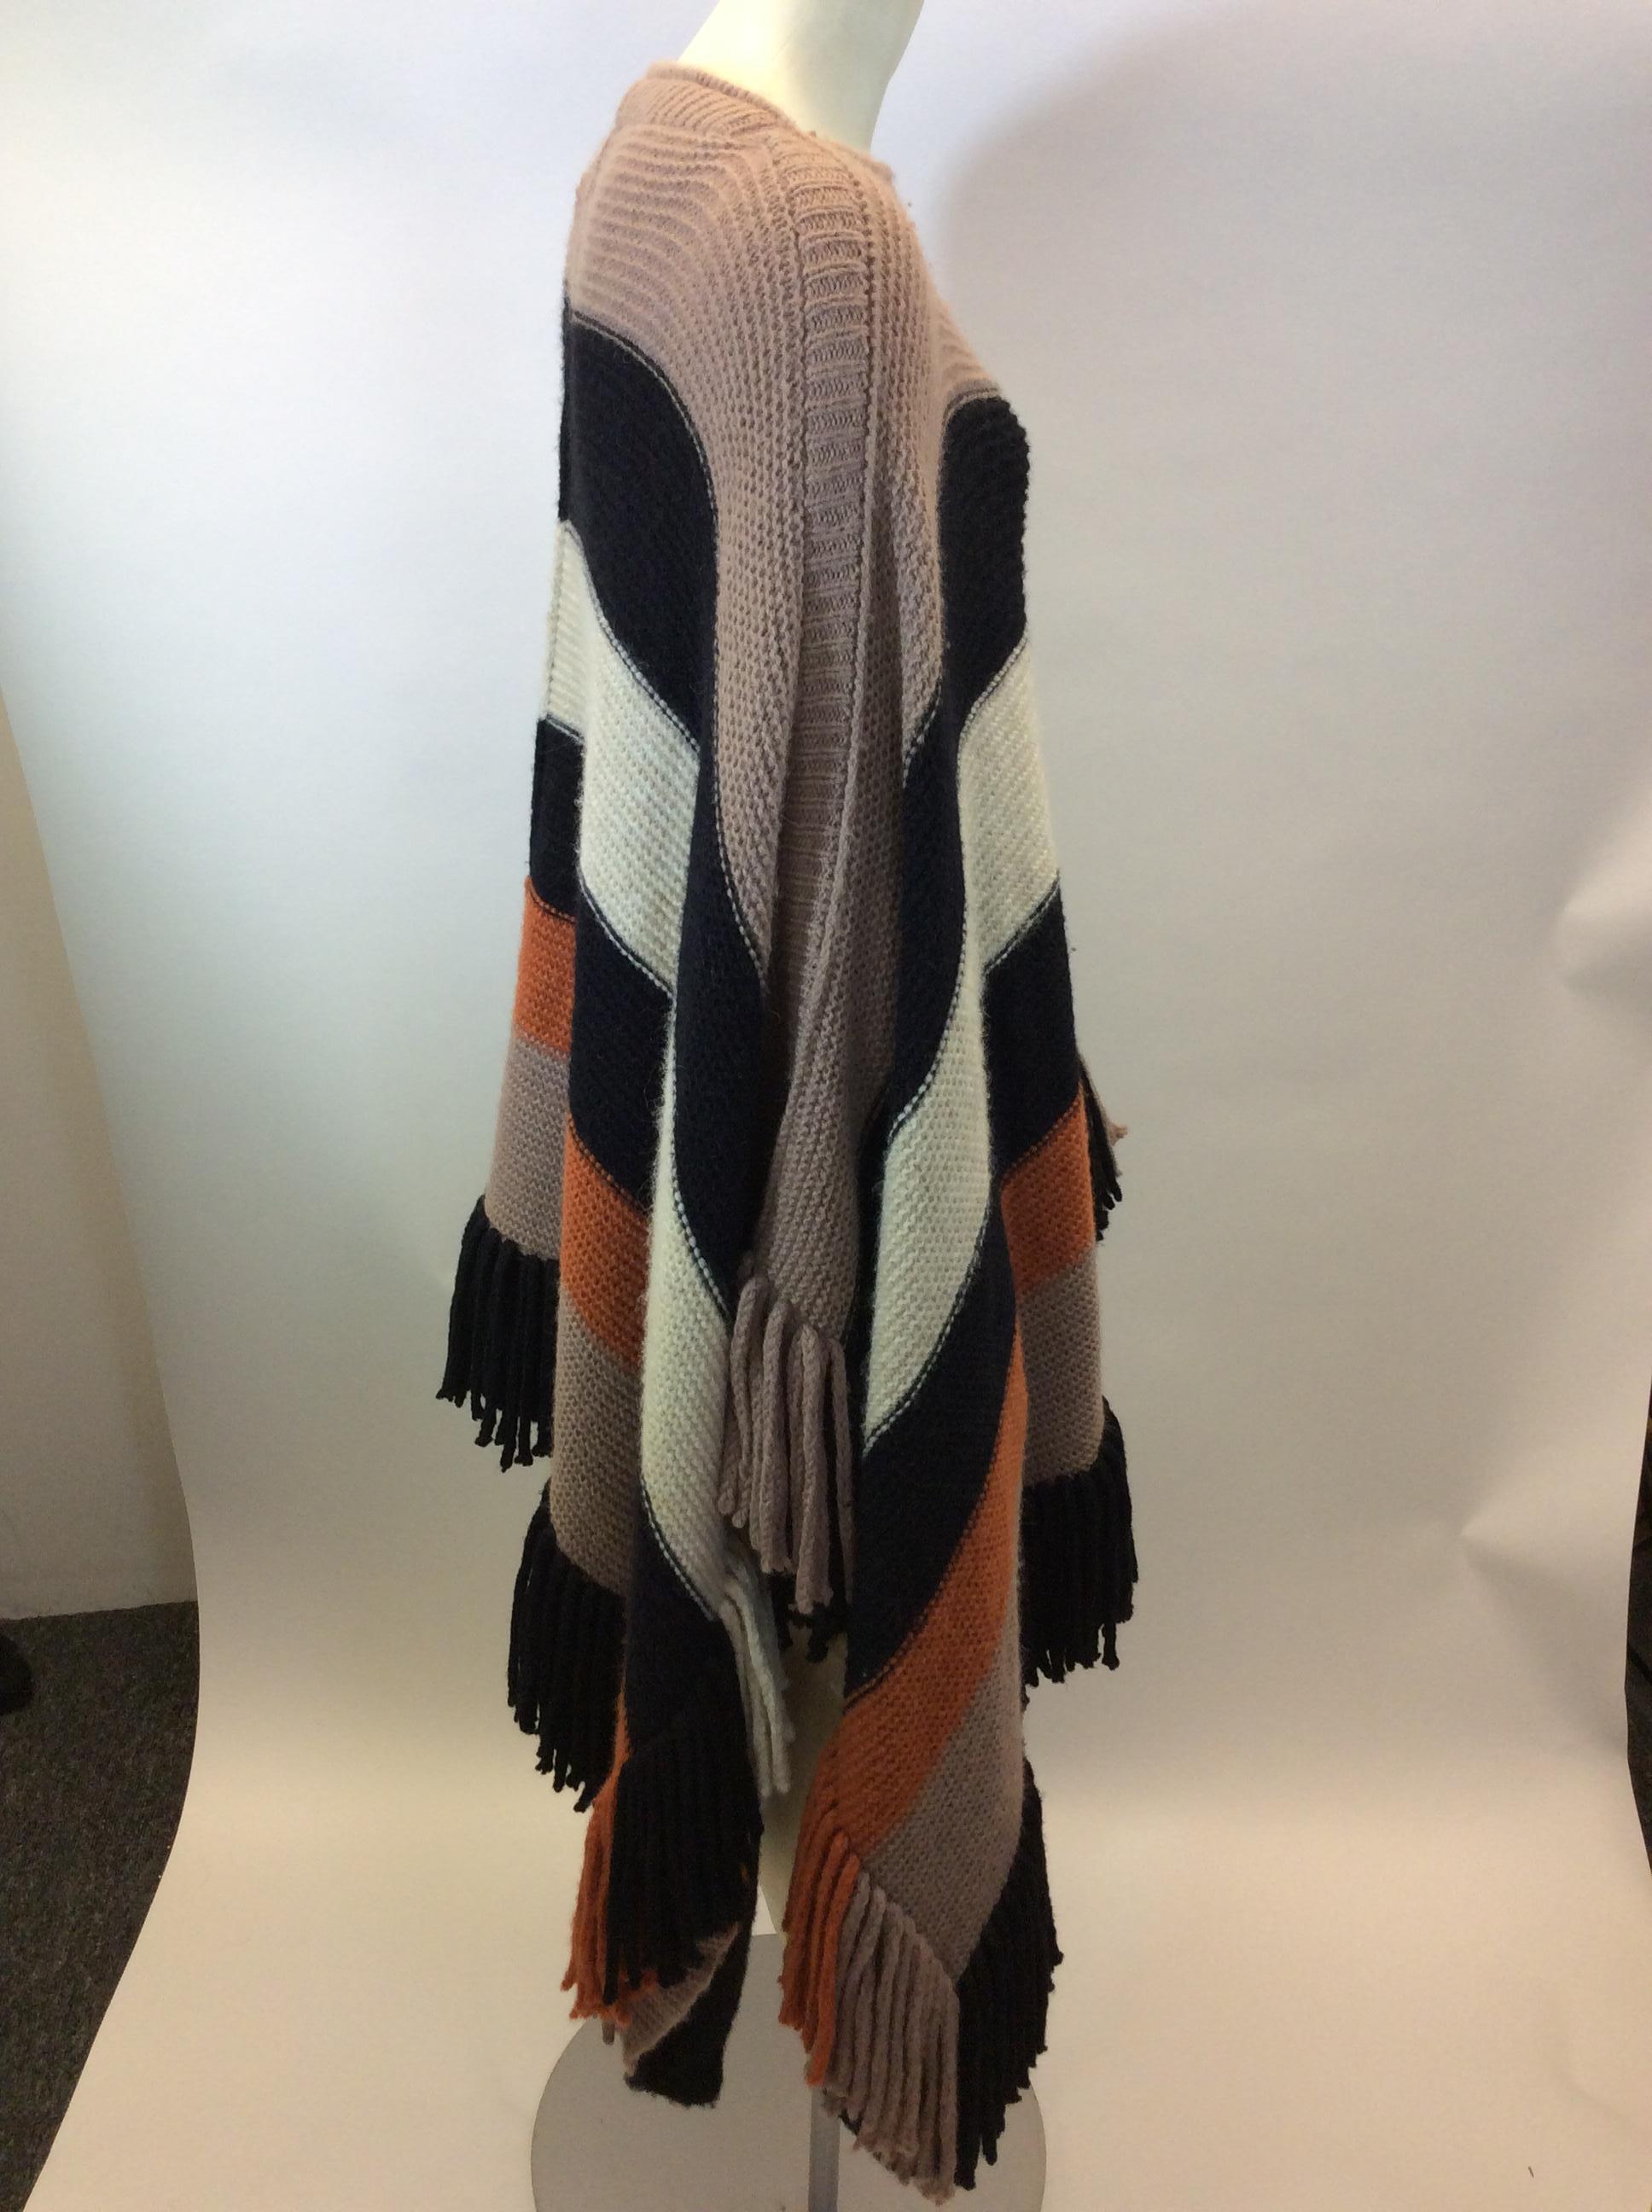 Sonia Rykiel Stripe Wool Cape In Excellent Condition For Sale In Narberth, PA